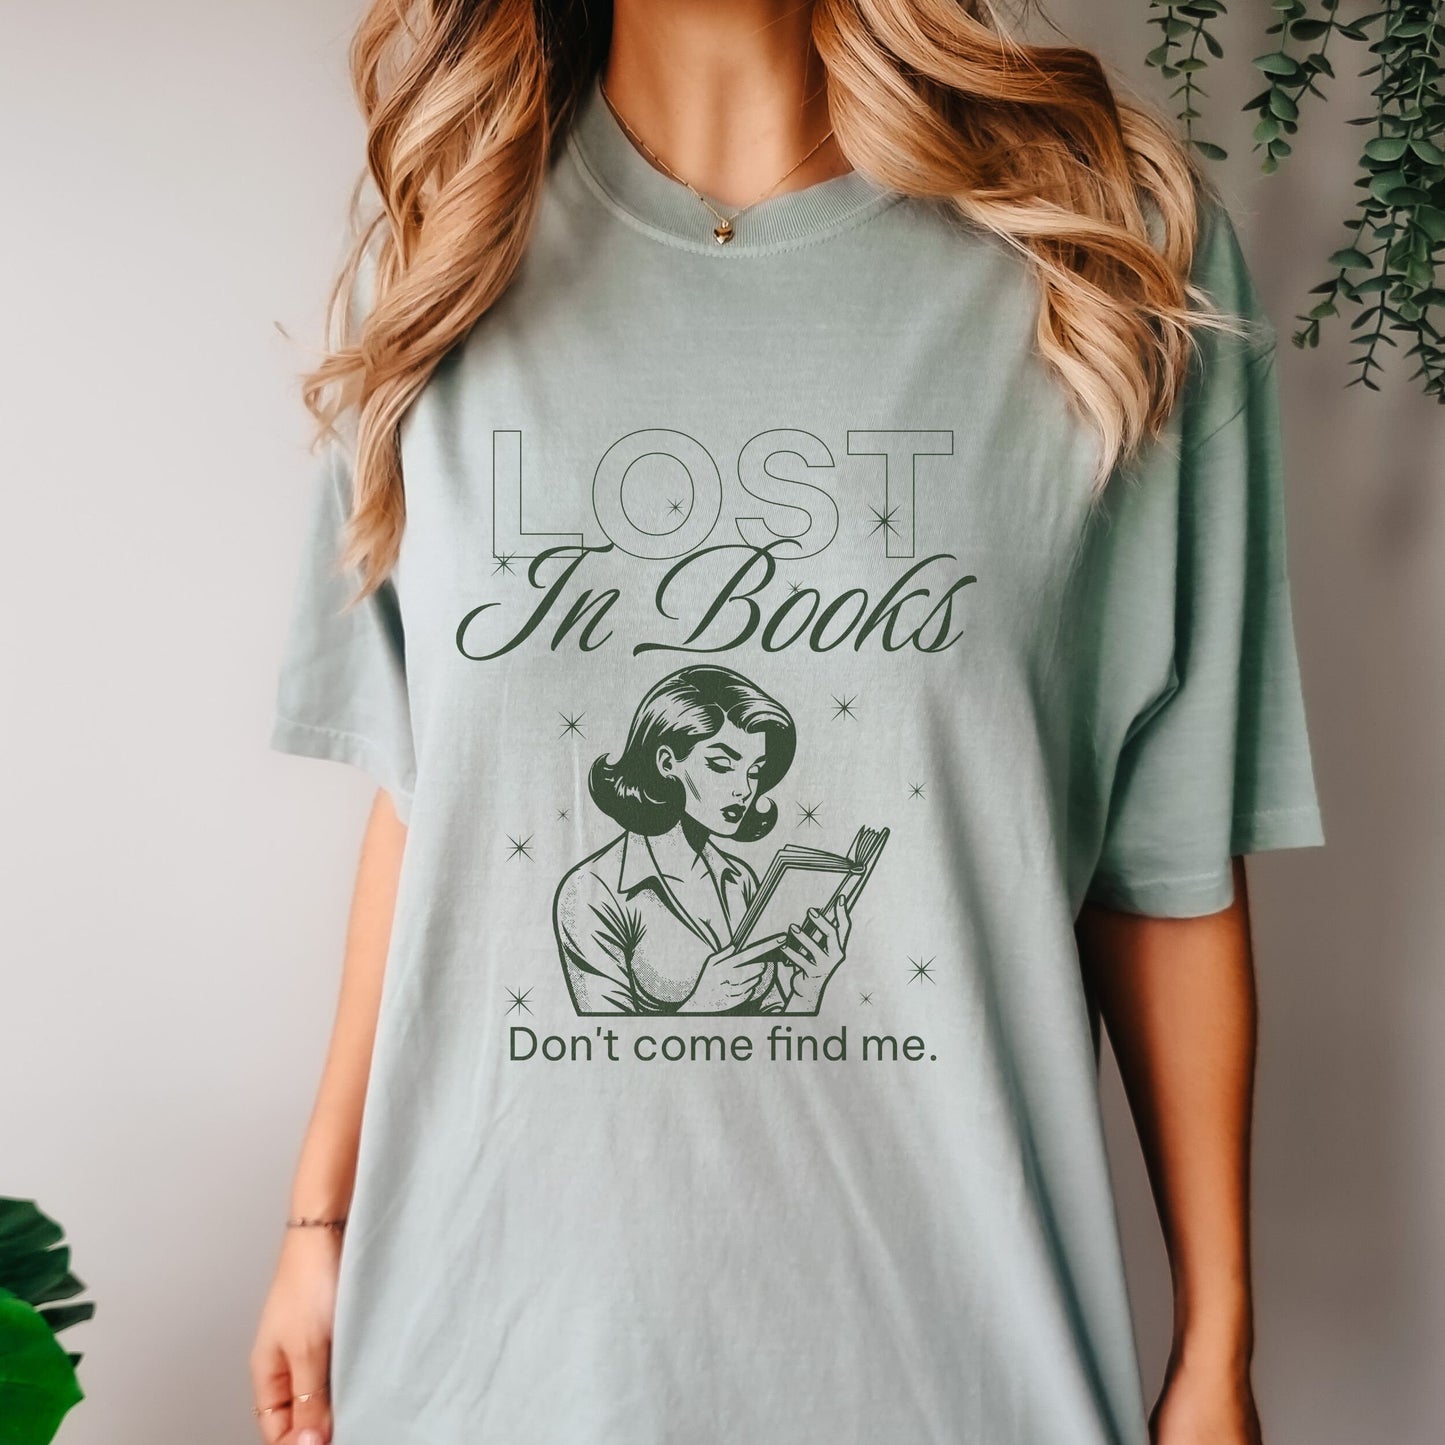 Lost In Books Comfort Colors TShirt Library Book Addict Shirt Enemies To Lovers Booktrovert Shirt Bookish Things Dark Romance Book Apparel